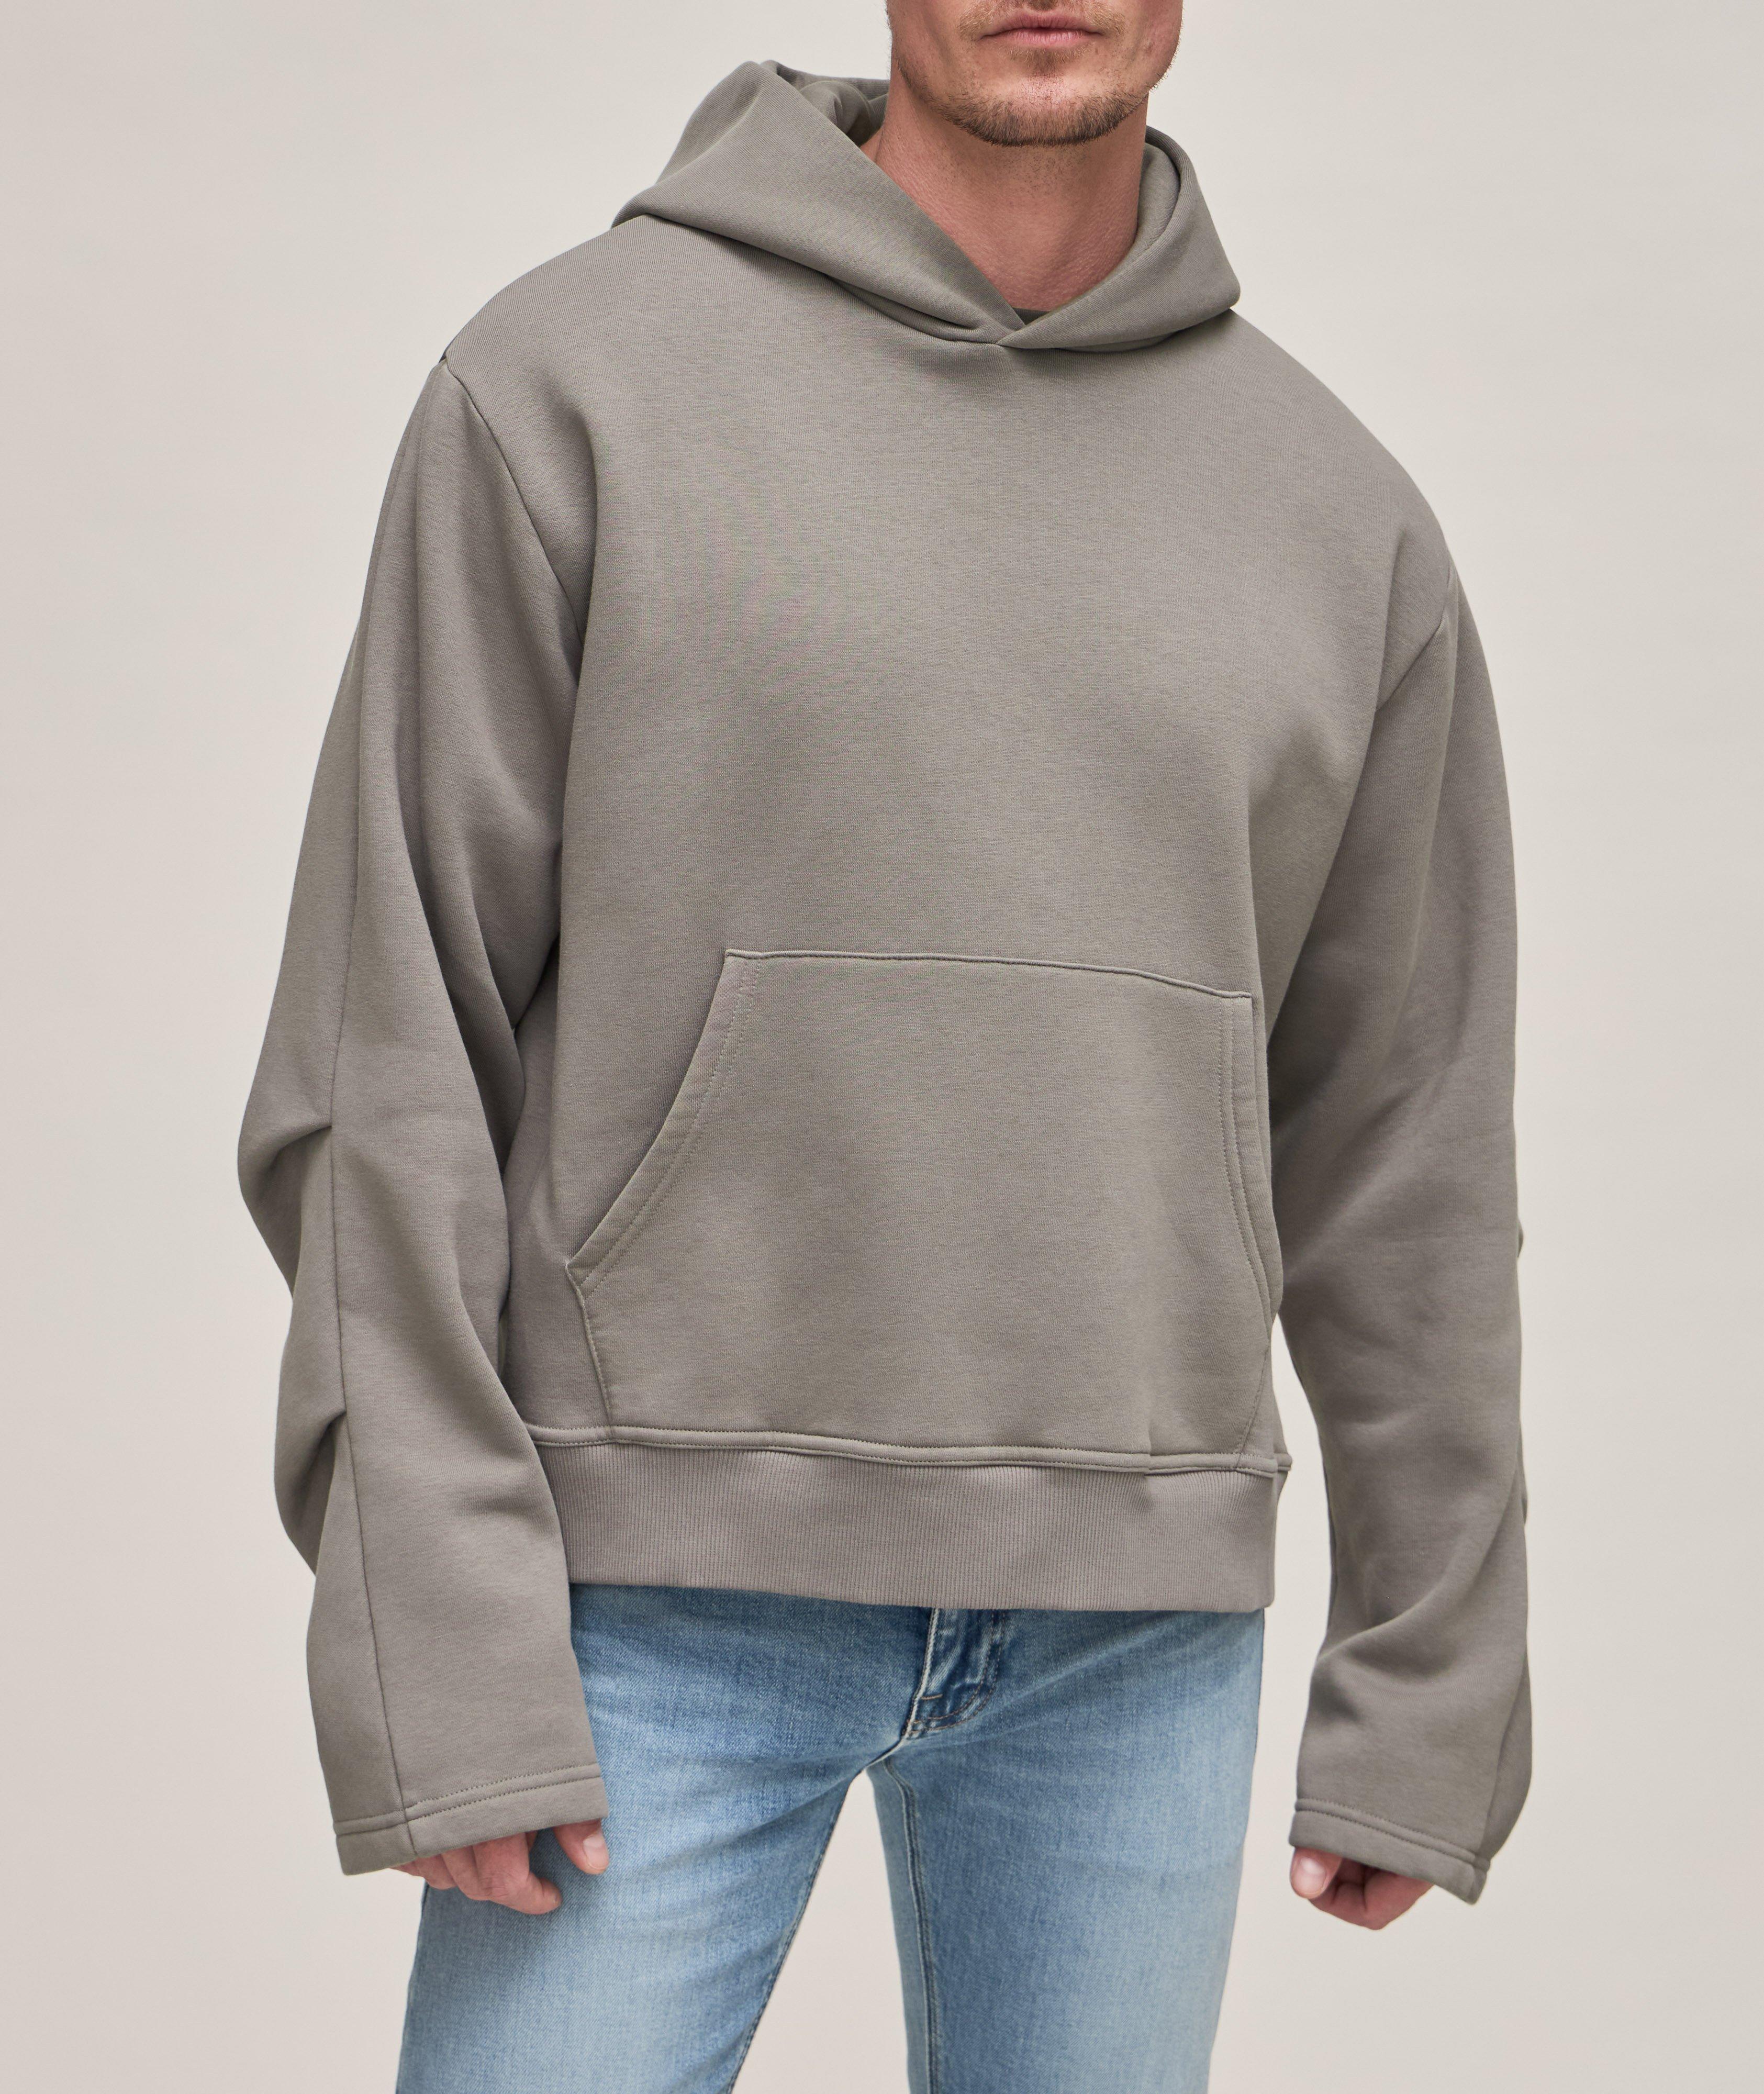 Cotton-Blend Hooded Sweater image 1